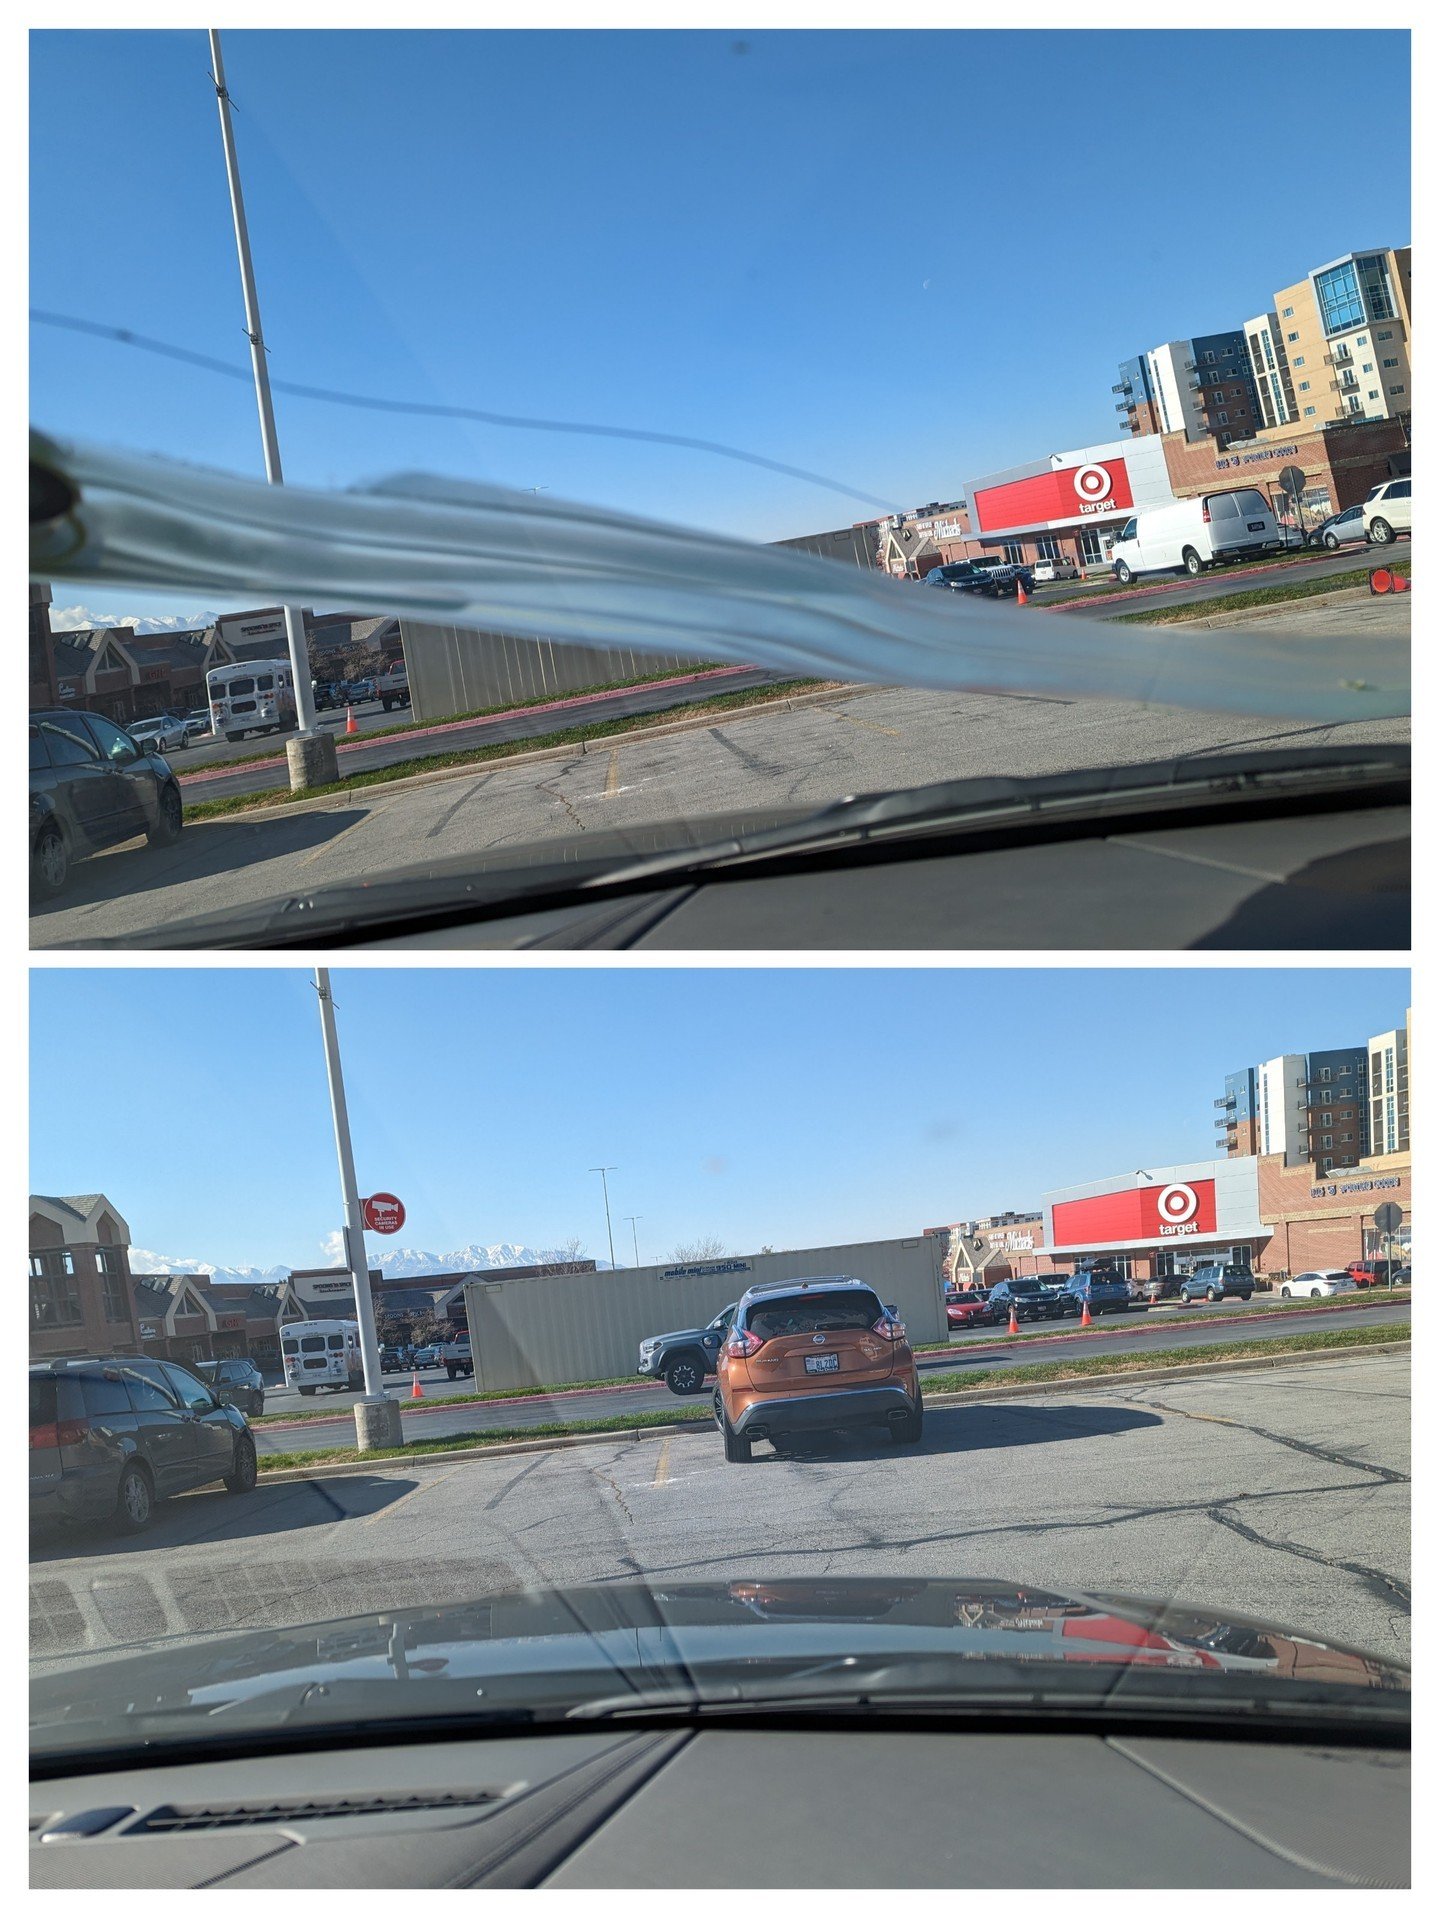 We can repair cracks up to about 18 in in length. We specialize in repairing windshields.  Let us save your windshields from replacement!

You can head over to our website for more information! Would you come out to our customers location to repair t